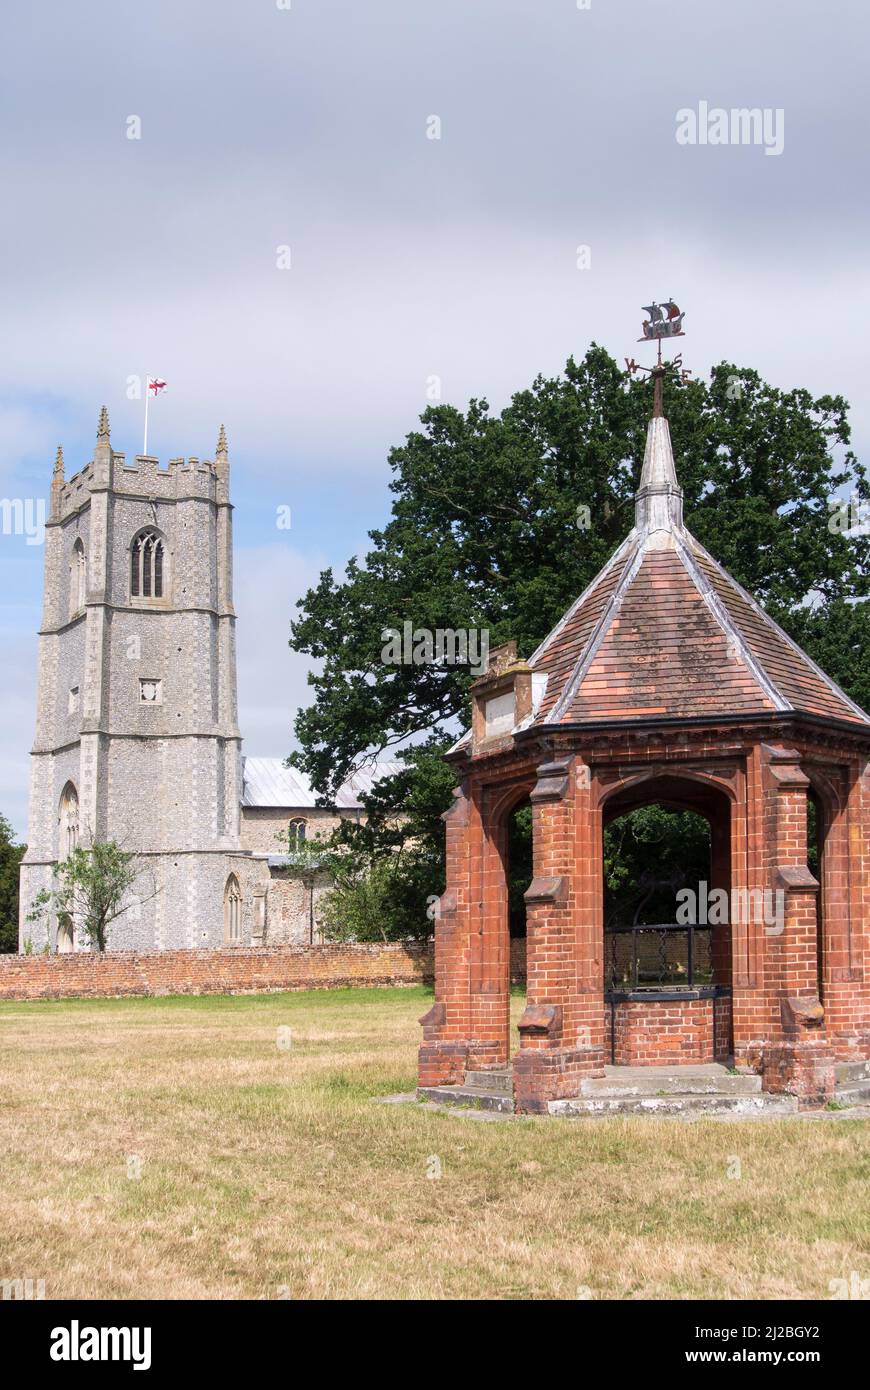 View of the church of St Peter and St Paul, and the covered village pump, Heydon Village, Norfolk, England Stock Photo